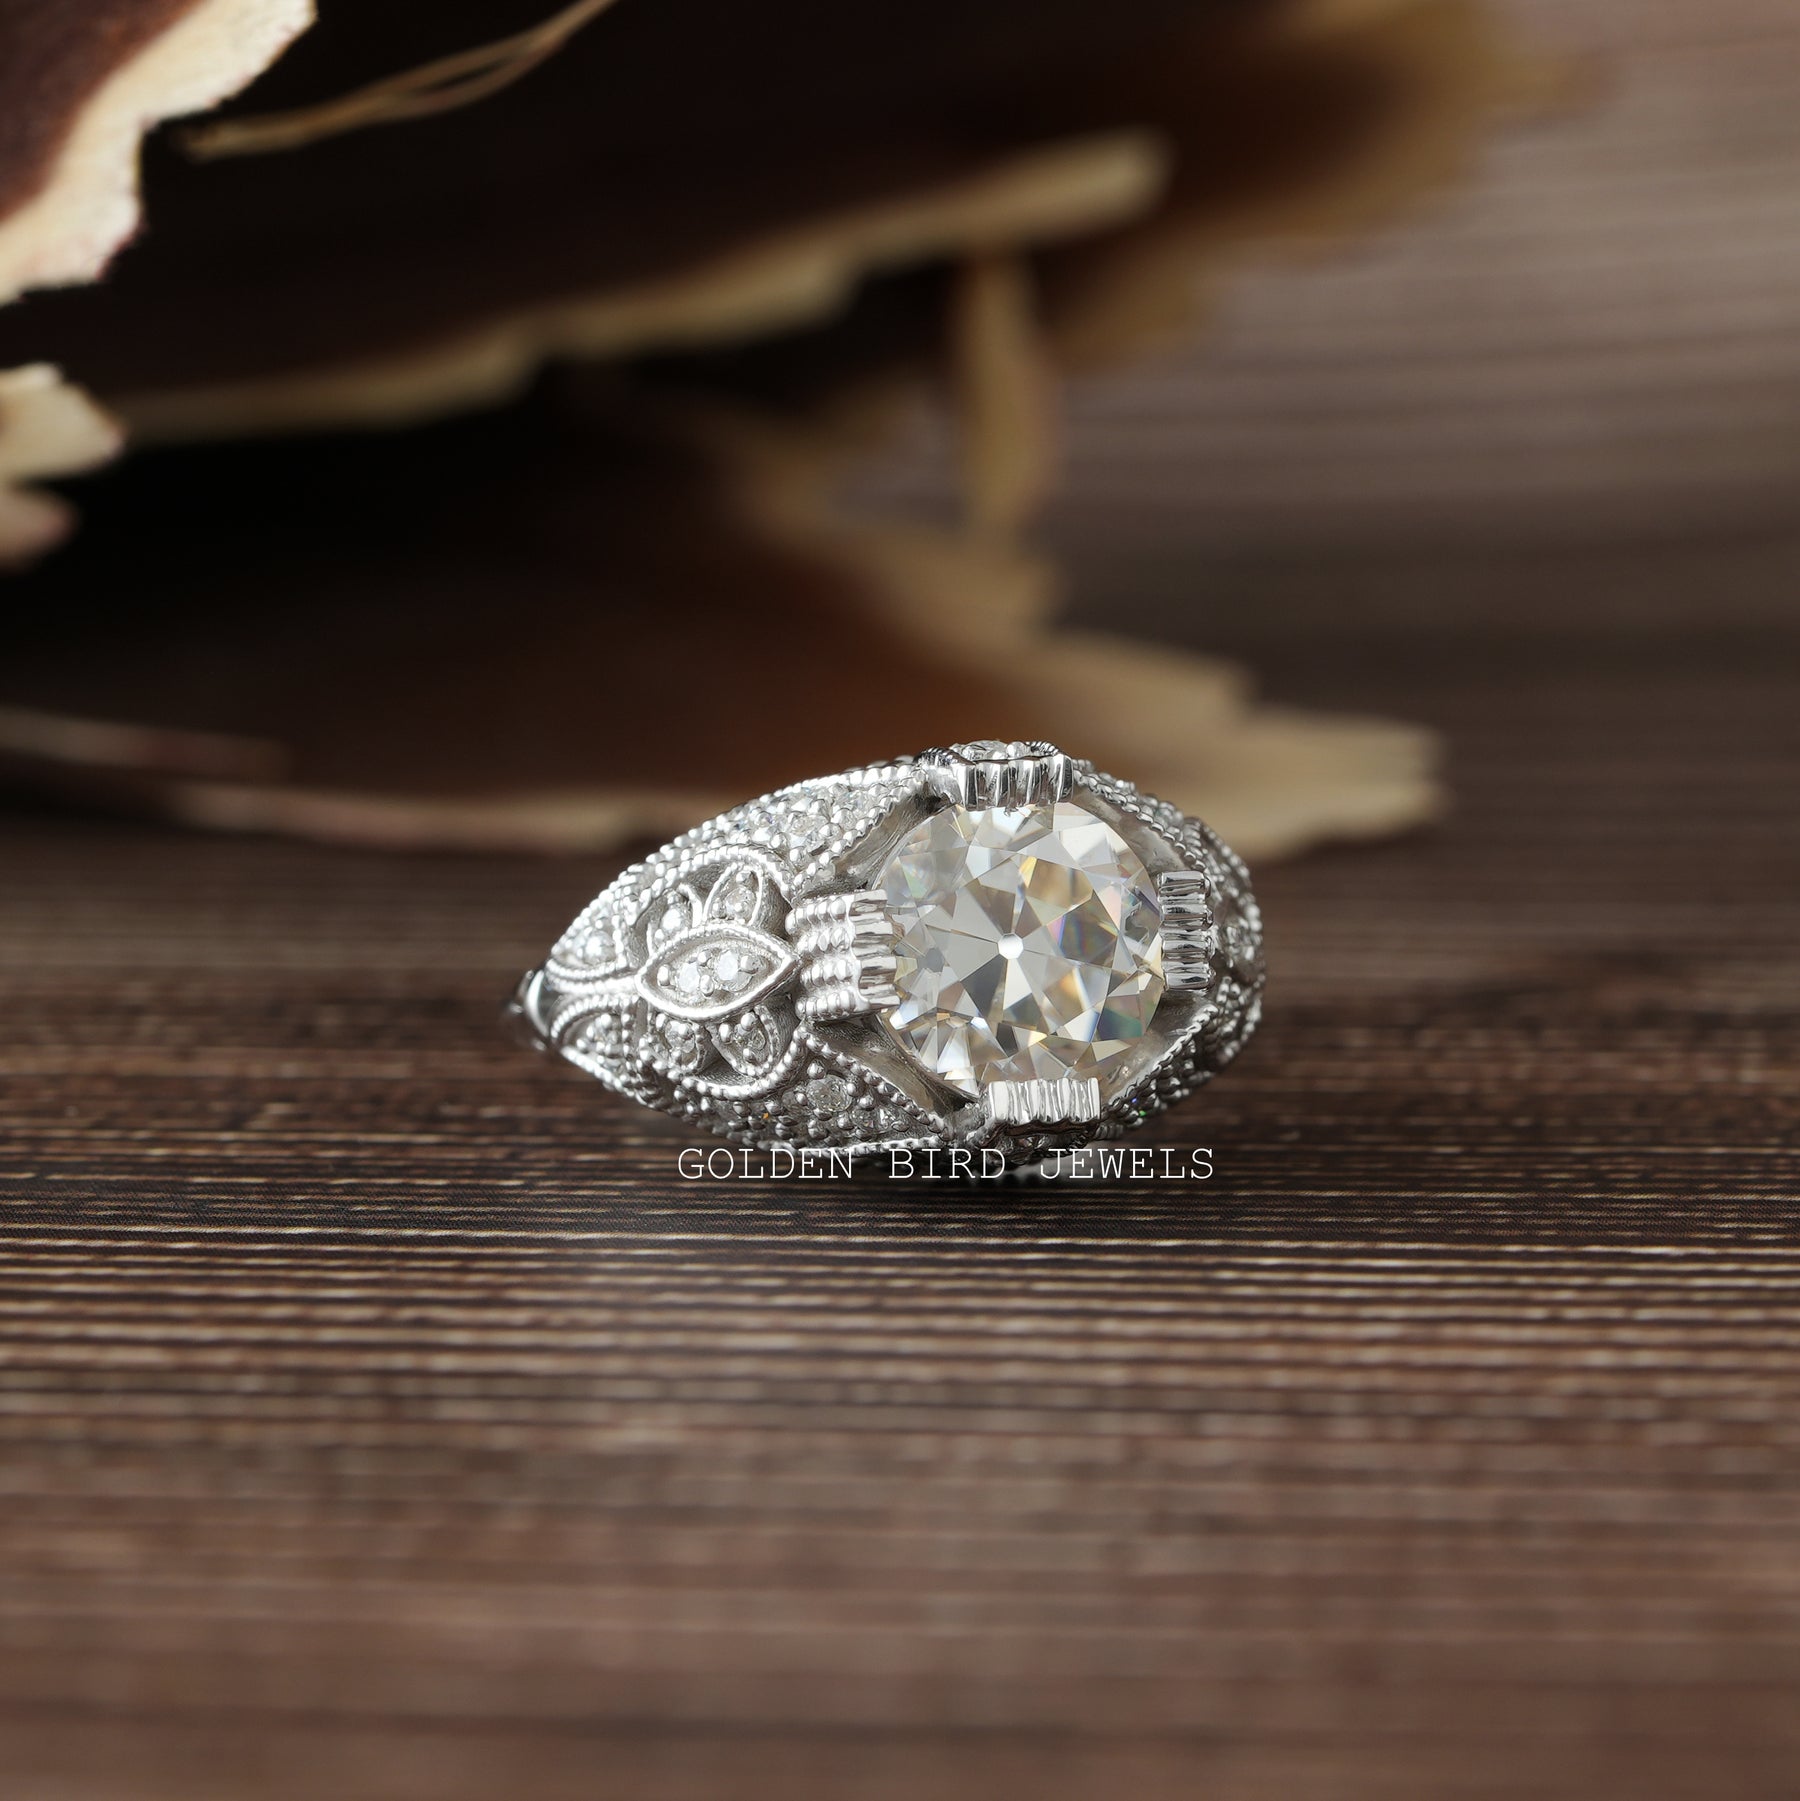 [This moissanite art deco ring made of oec round cut stone with vvs clarity moissanite]-[Golden Bird Jewels]